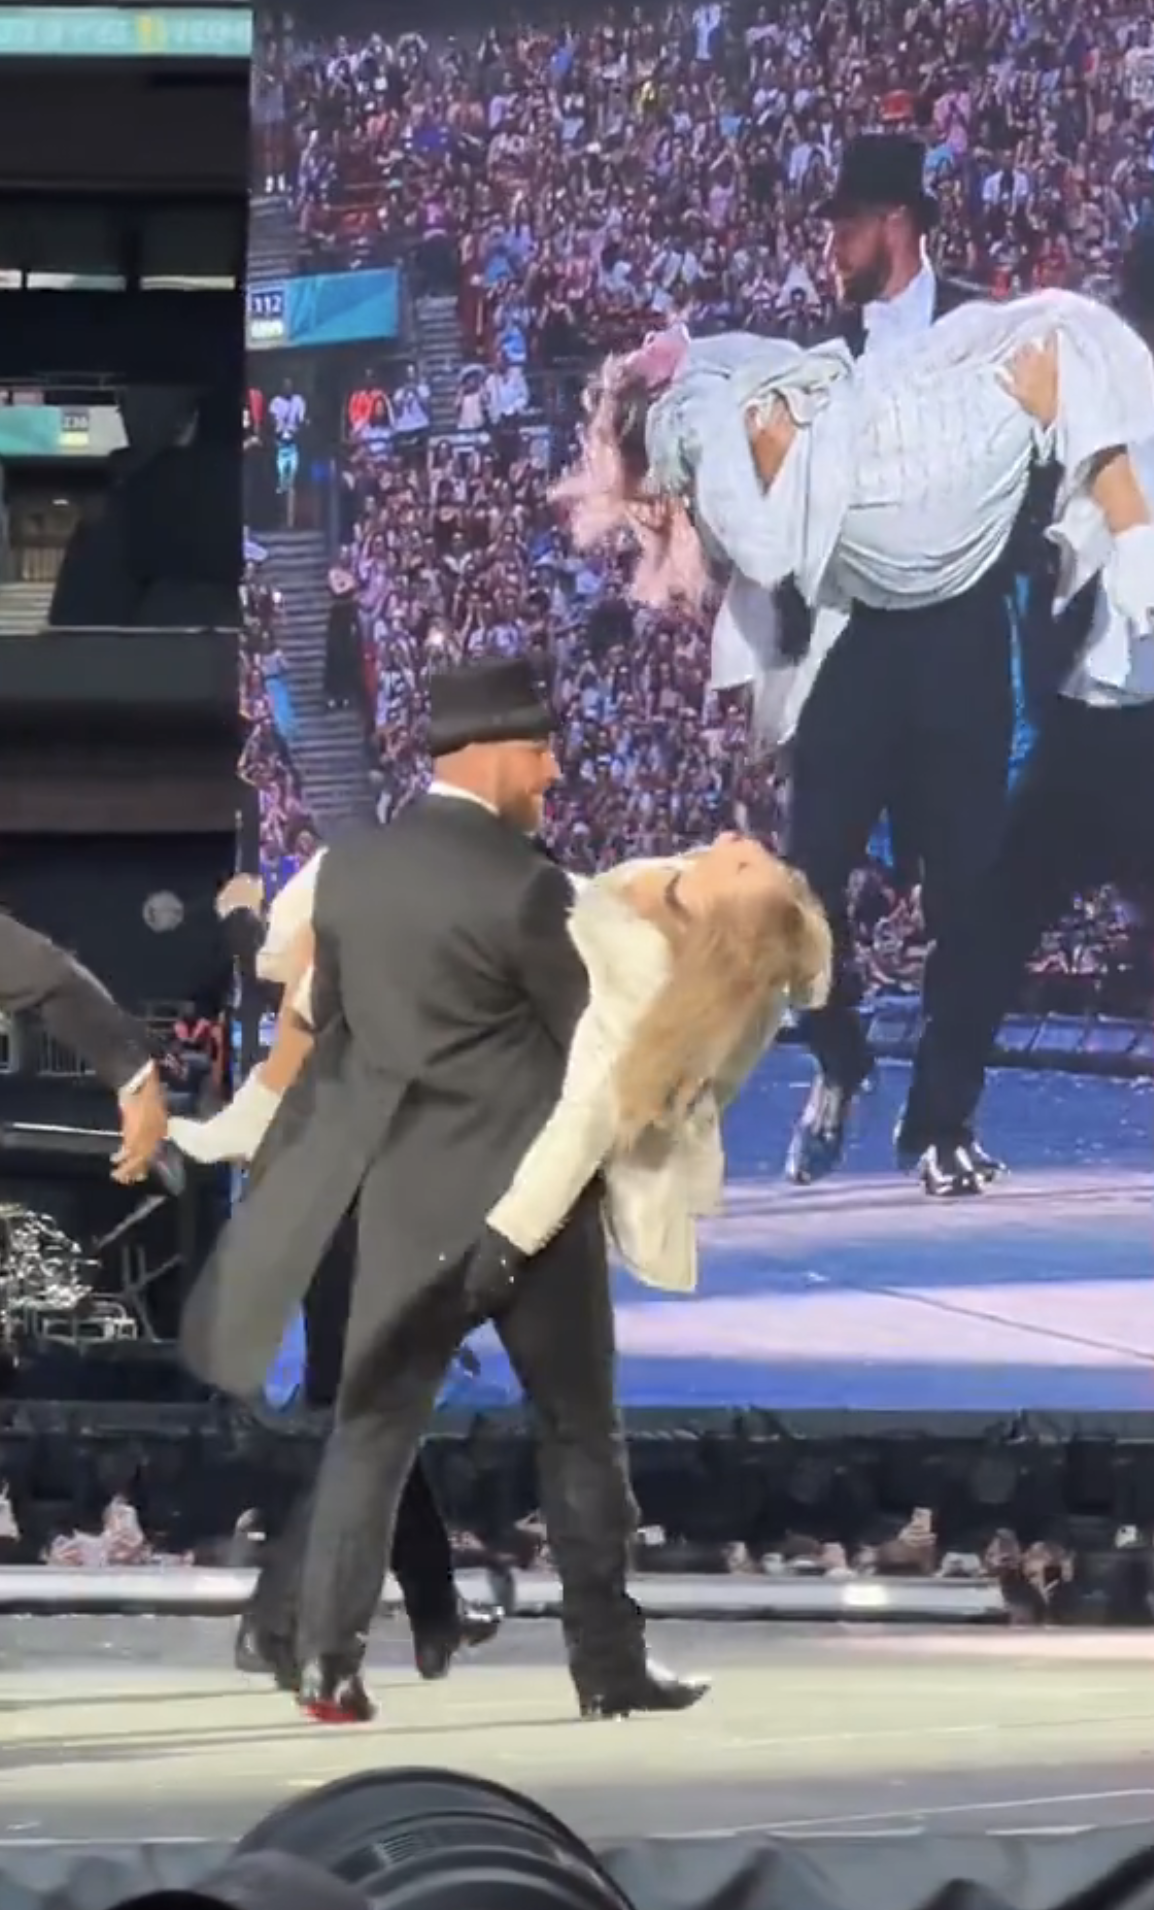 Travis Kelce carries Taylor Swift, who is pretending to be unconscious, during a concert, with a large screen showing the same scene in the background